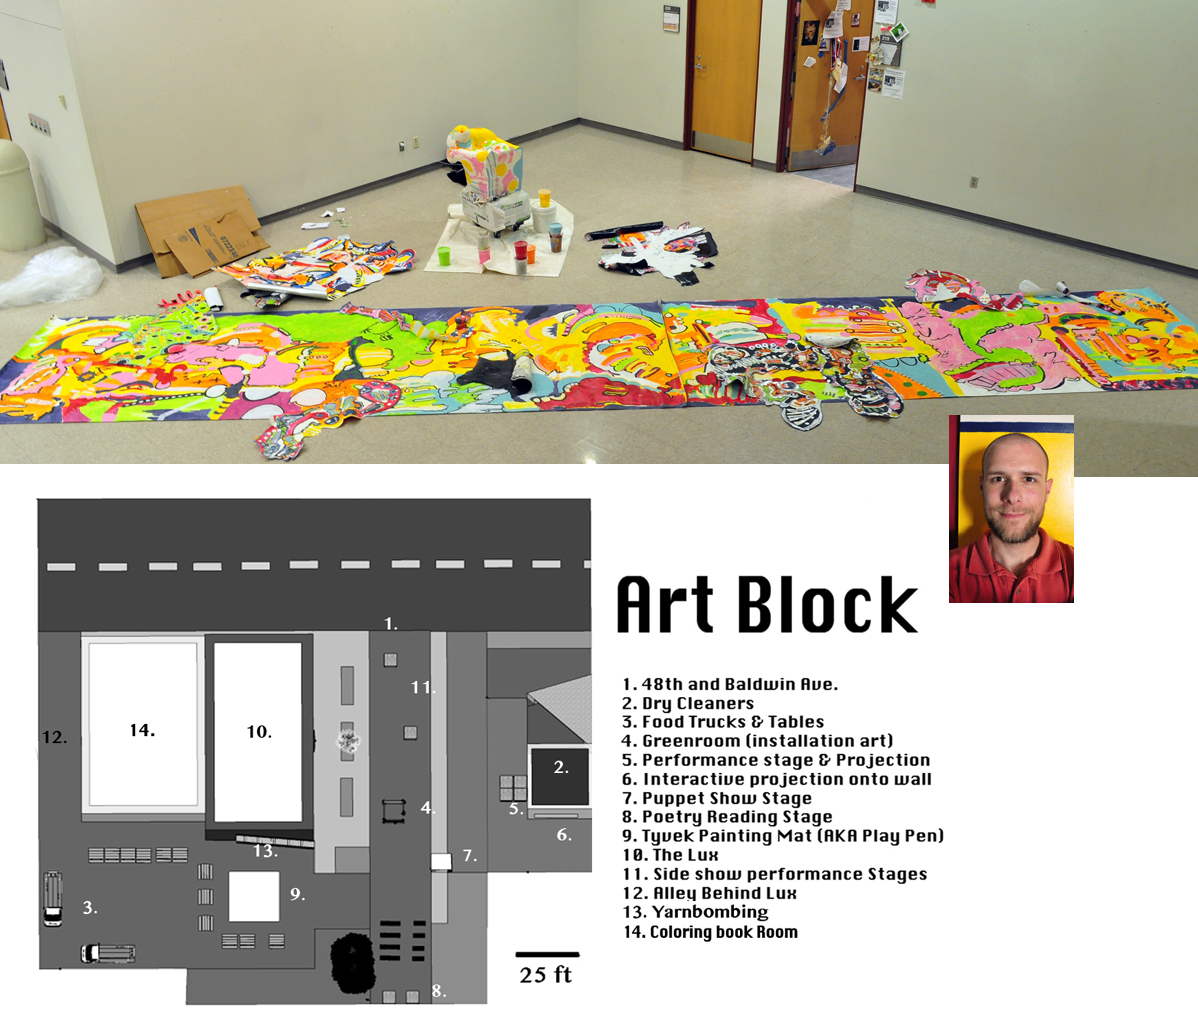 (clockwise from top): A process shot of the 30' x 5' painting that will be inside Greenroom; Sam Berner; a map showing Art Block's many activities. 